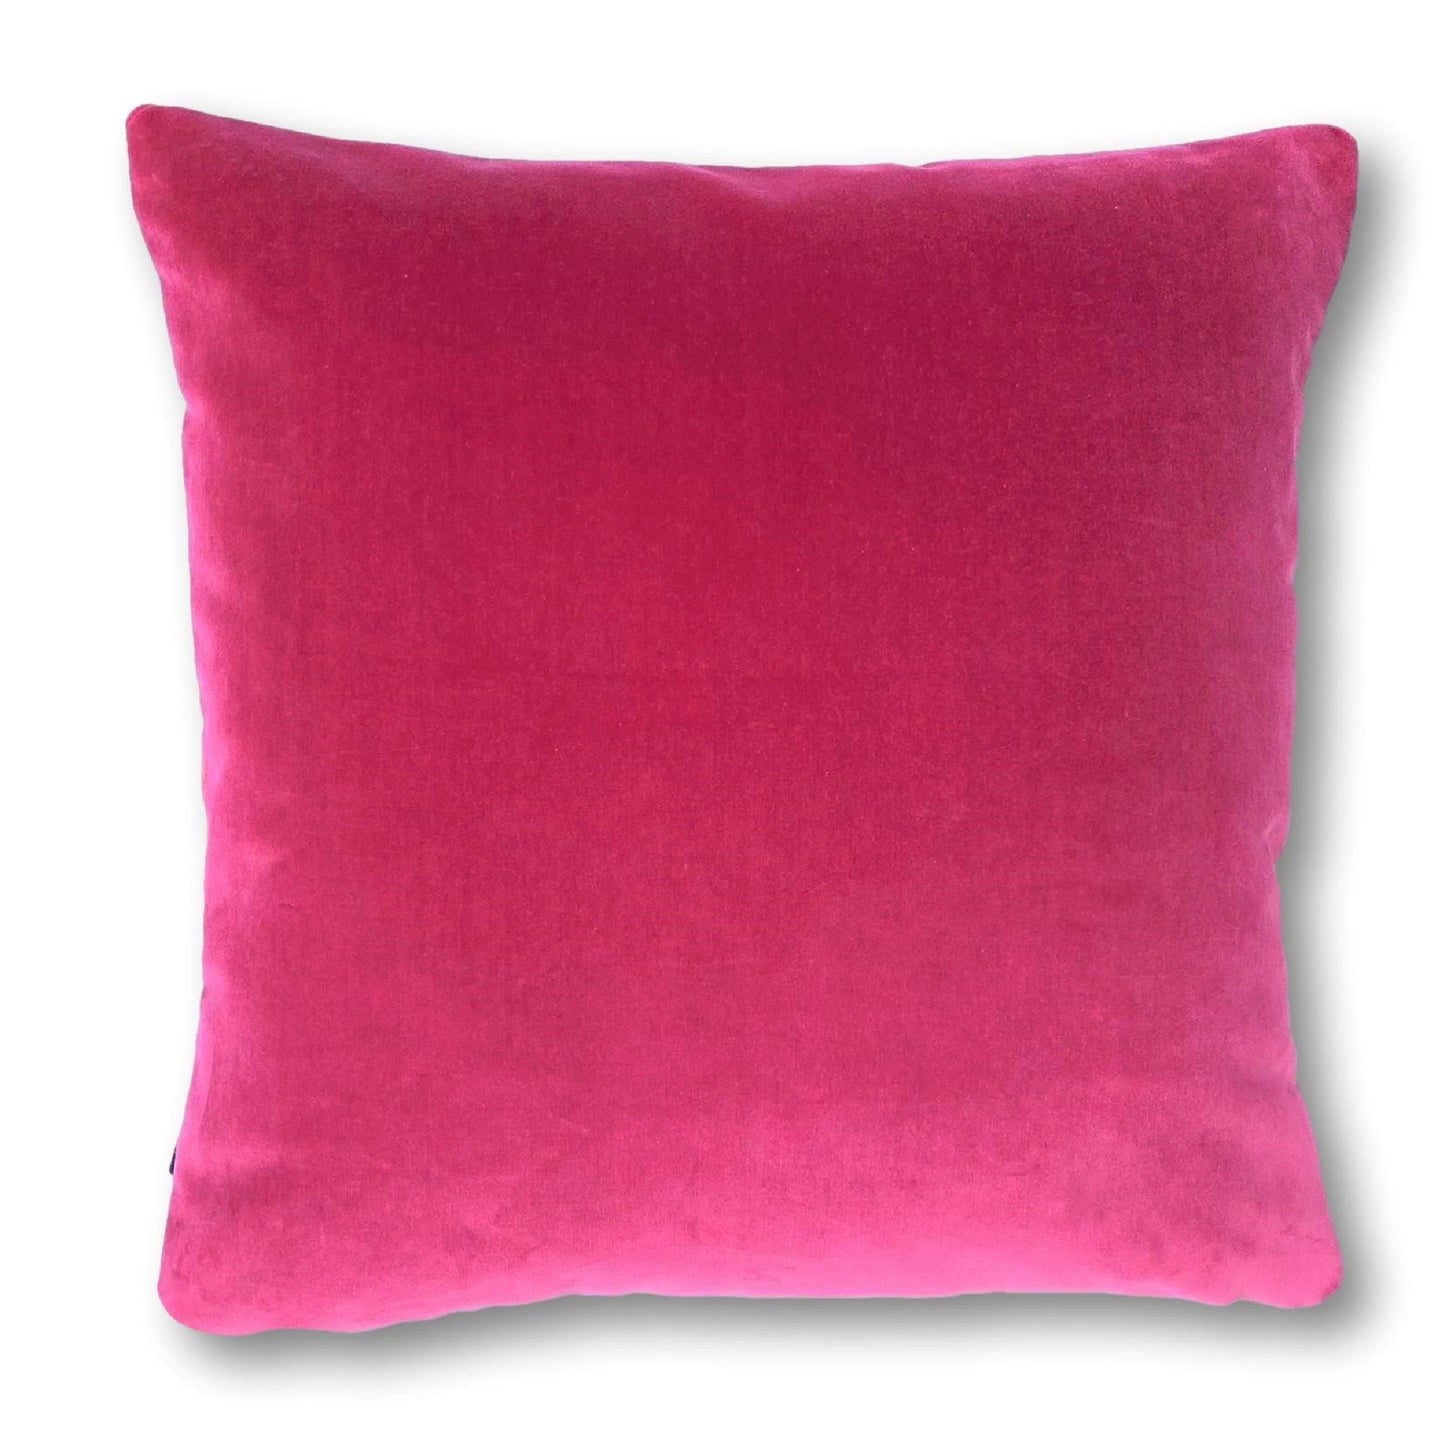 grey and pink cushion covers